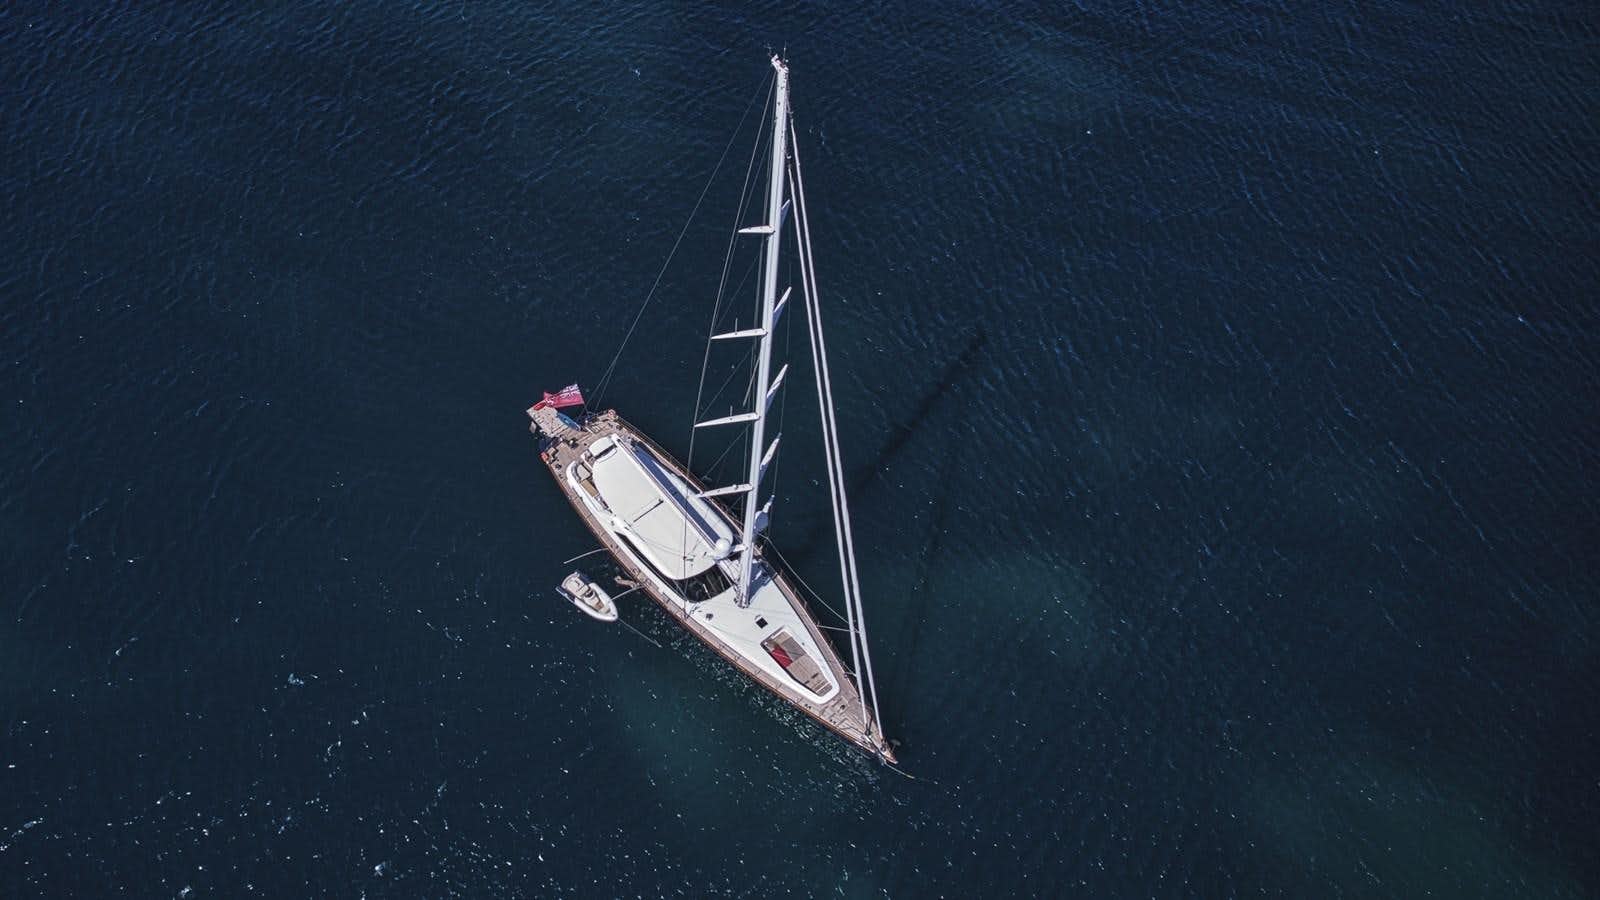 STATE OF GRACE Yacht for Sale in Spain, 129' (39.4m) 2013 PERINI NAVI